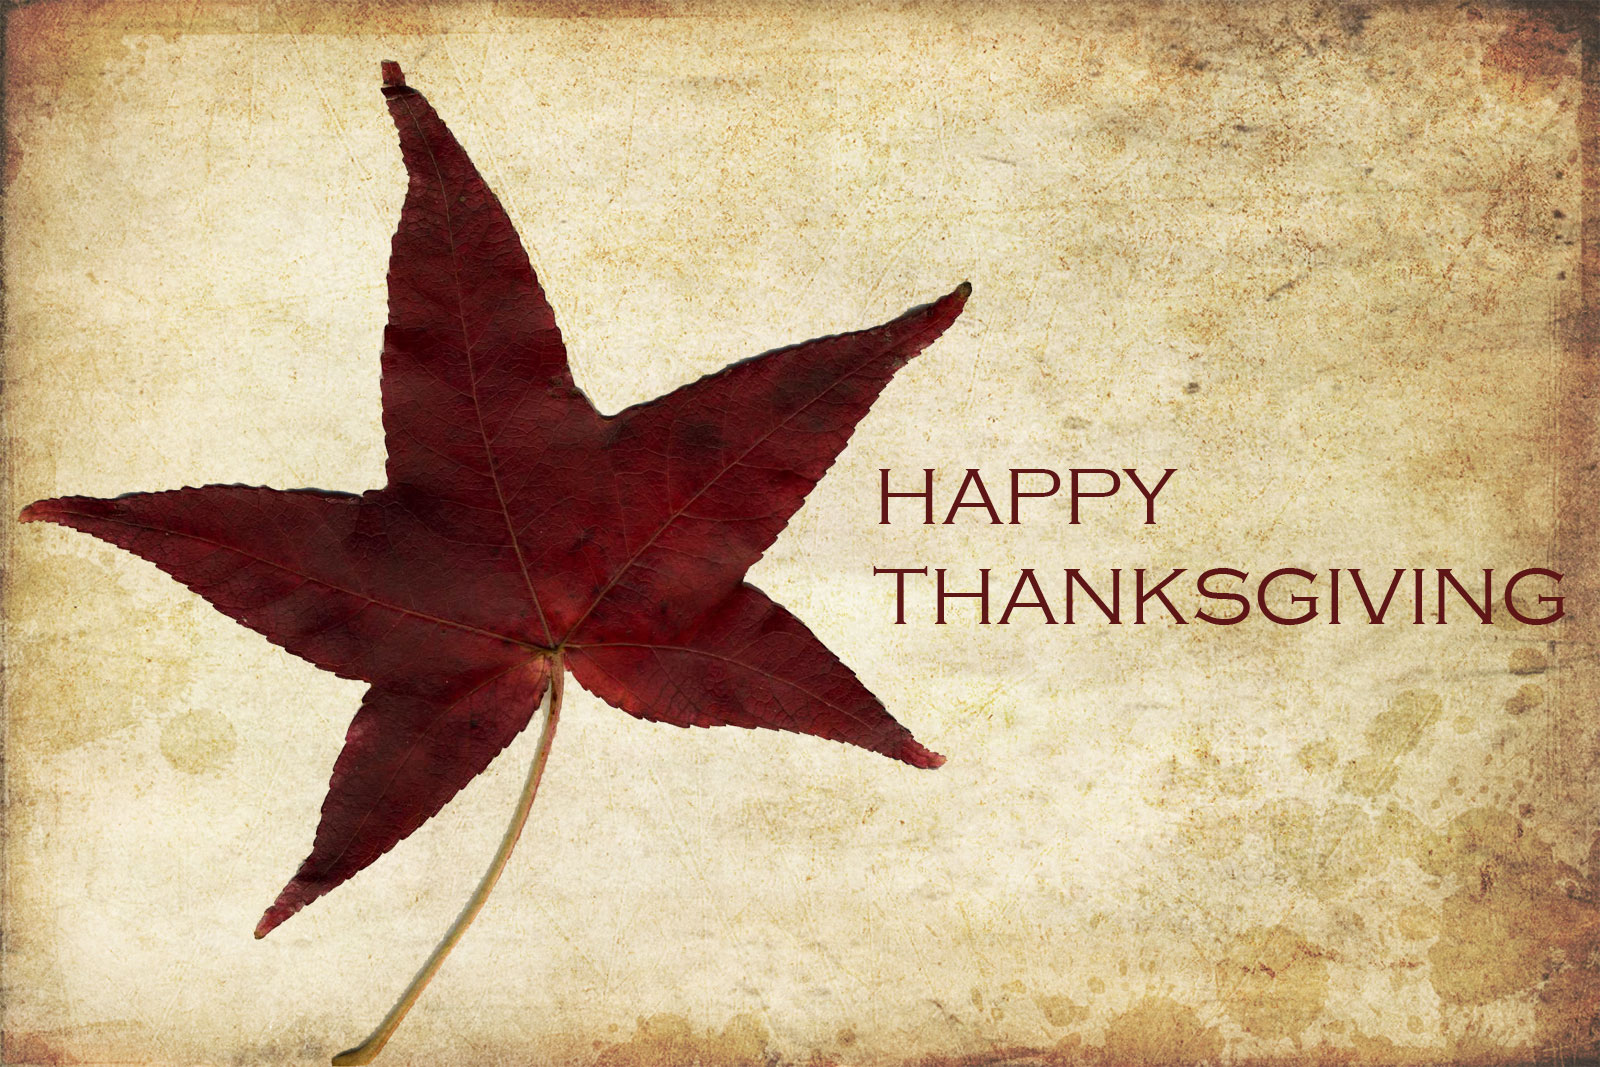 Happy Thanksgiving Day 2013 HD Wallpapers & Facebook Cover Photos